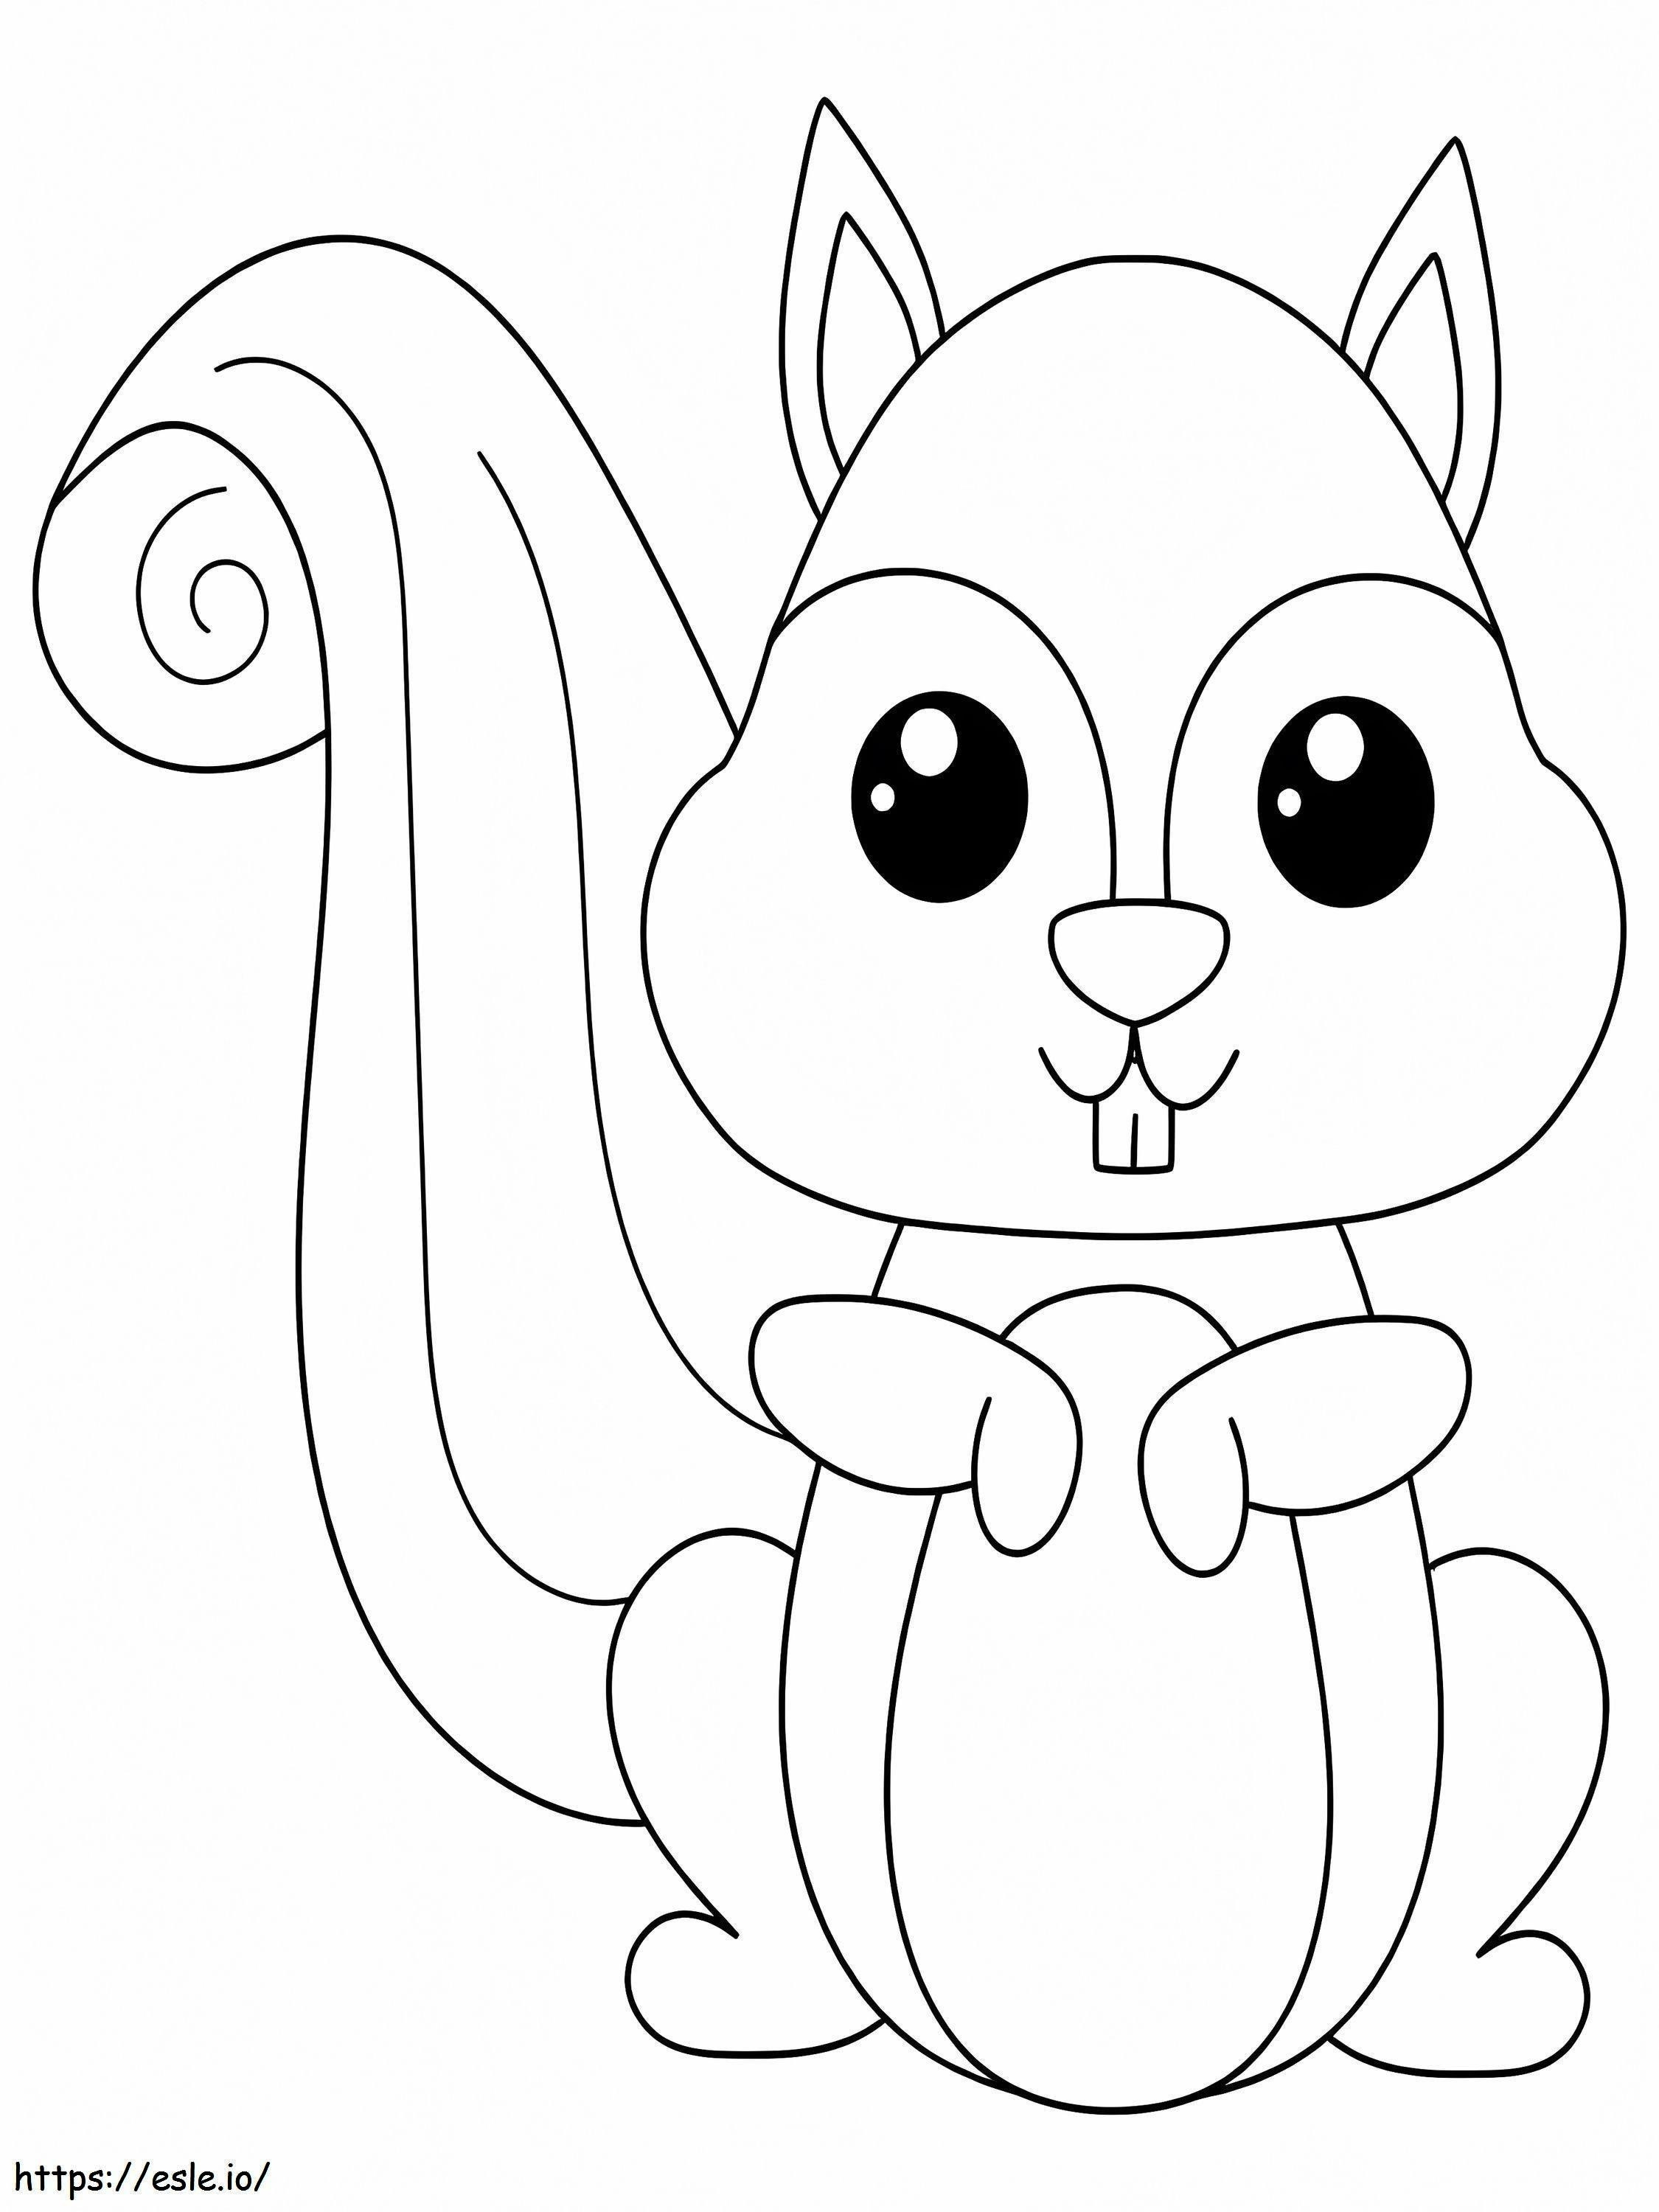 Perfect Squirrel coloring page